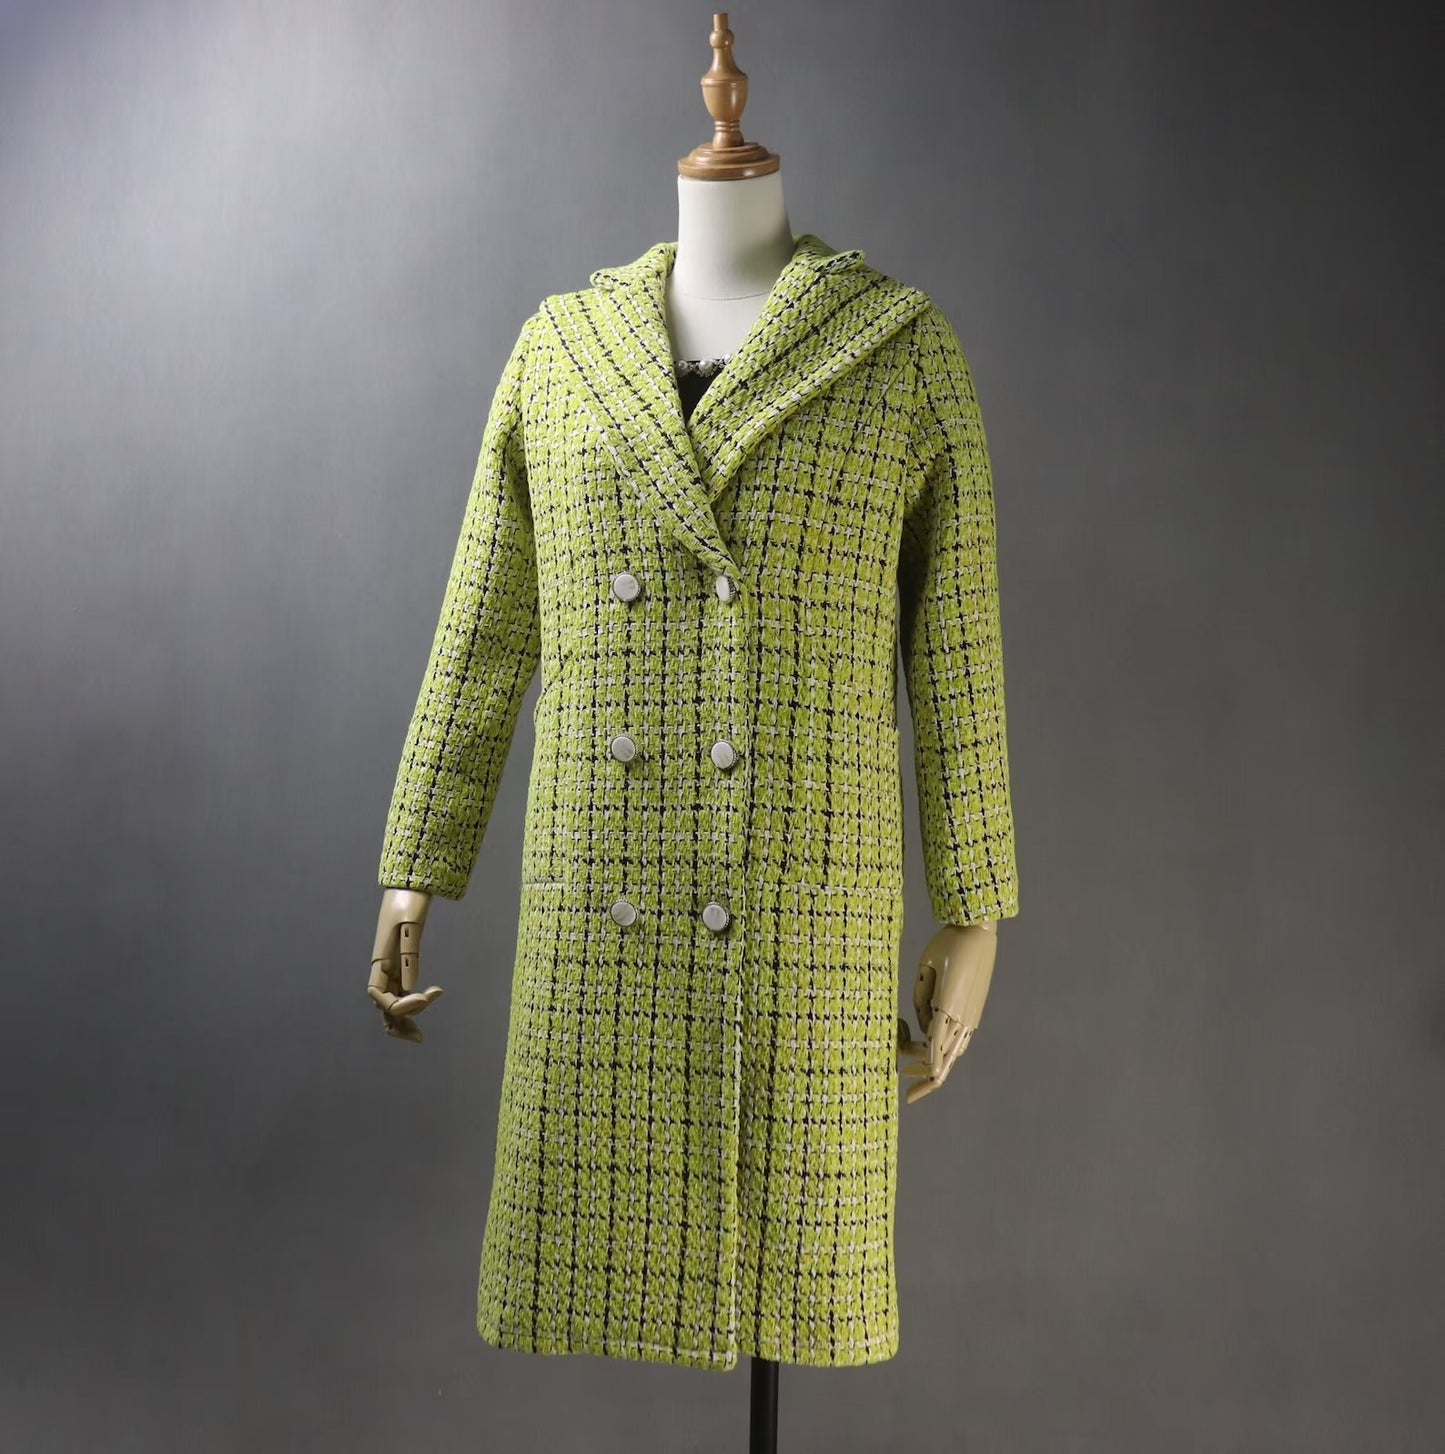 Women's Yellow Winter Tailor MADE Checked Long Warm Coat  UK CUSTOMER SERVICE! Women's Yellow Winter Tailor MADE Checked Long Warm Coat - Yellow Checked warm coat can worn for Winter season and Autumn season. Feel comfort and elegant. All items are made to order. Please advise your height, weight and body measurements ( Bust, shoulder, Sleeves, Waist and Length etc). Our tailors will make the order for you!  Materials: Wool blend (20% Wool)